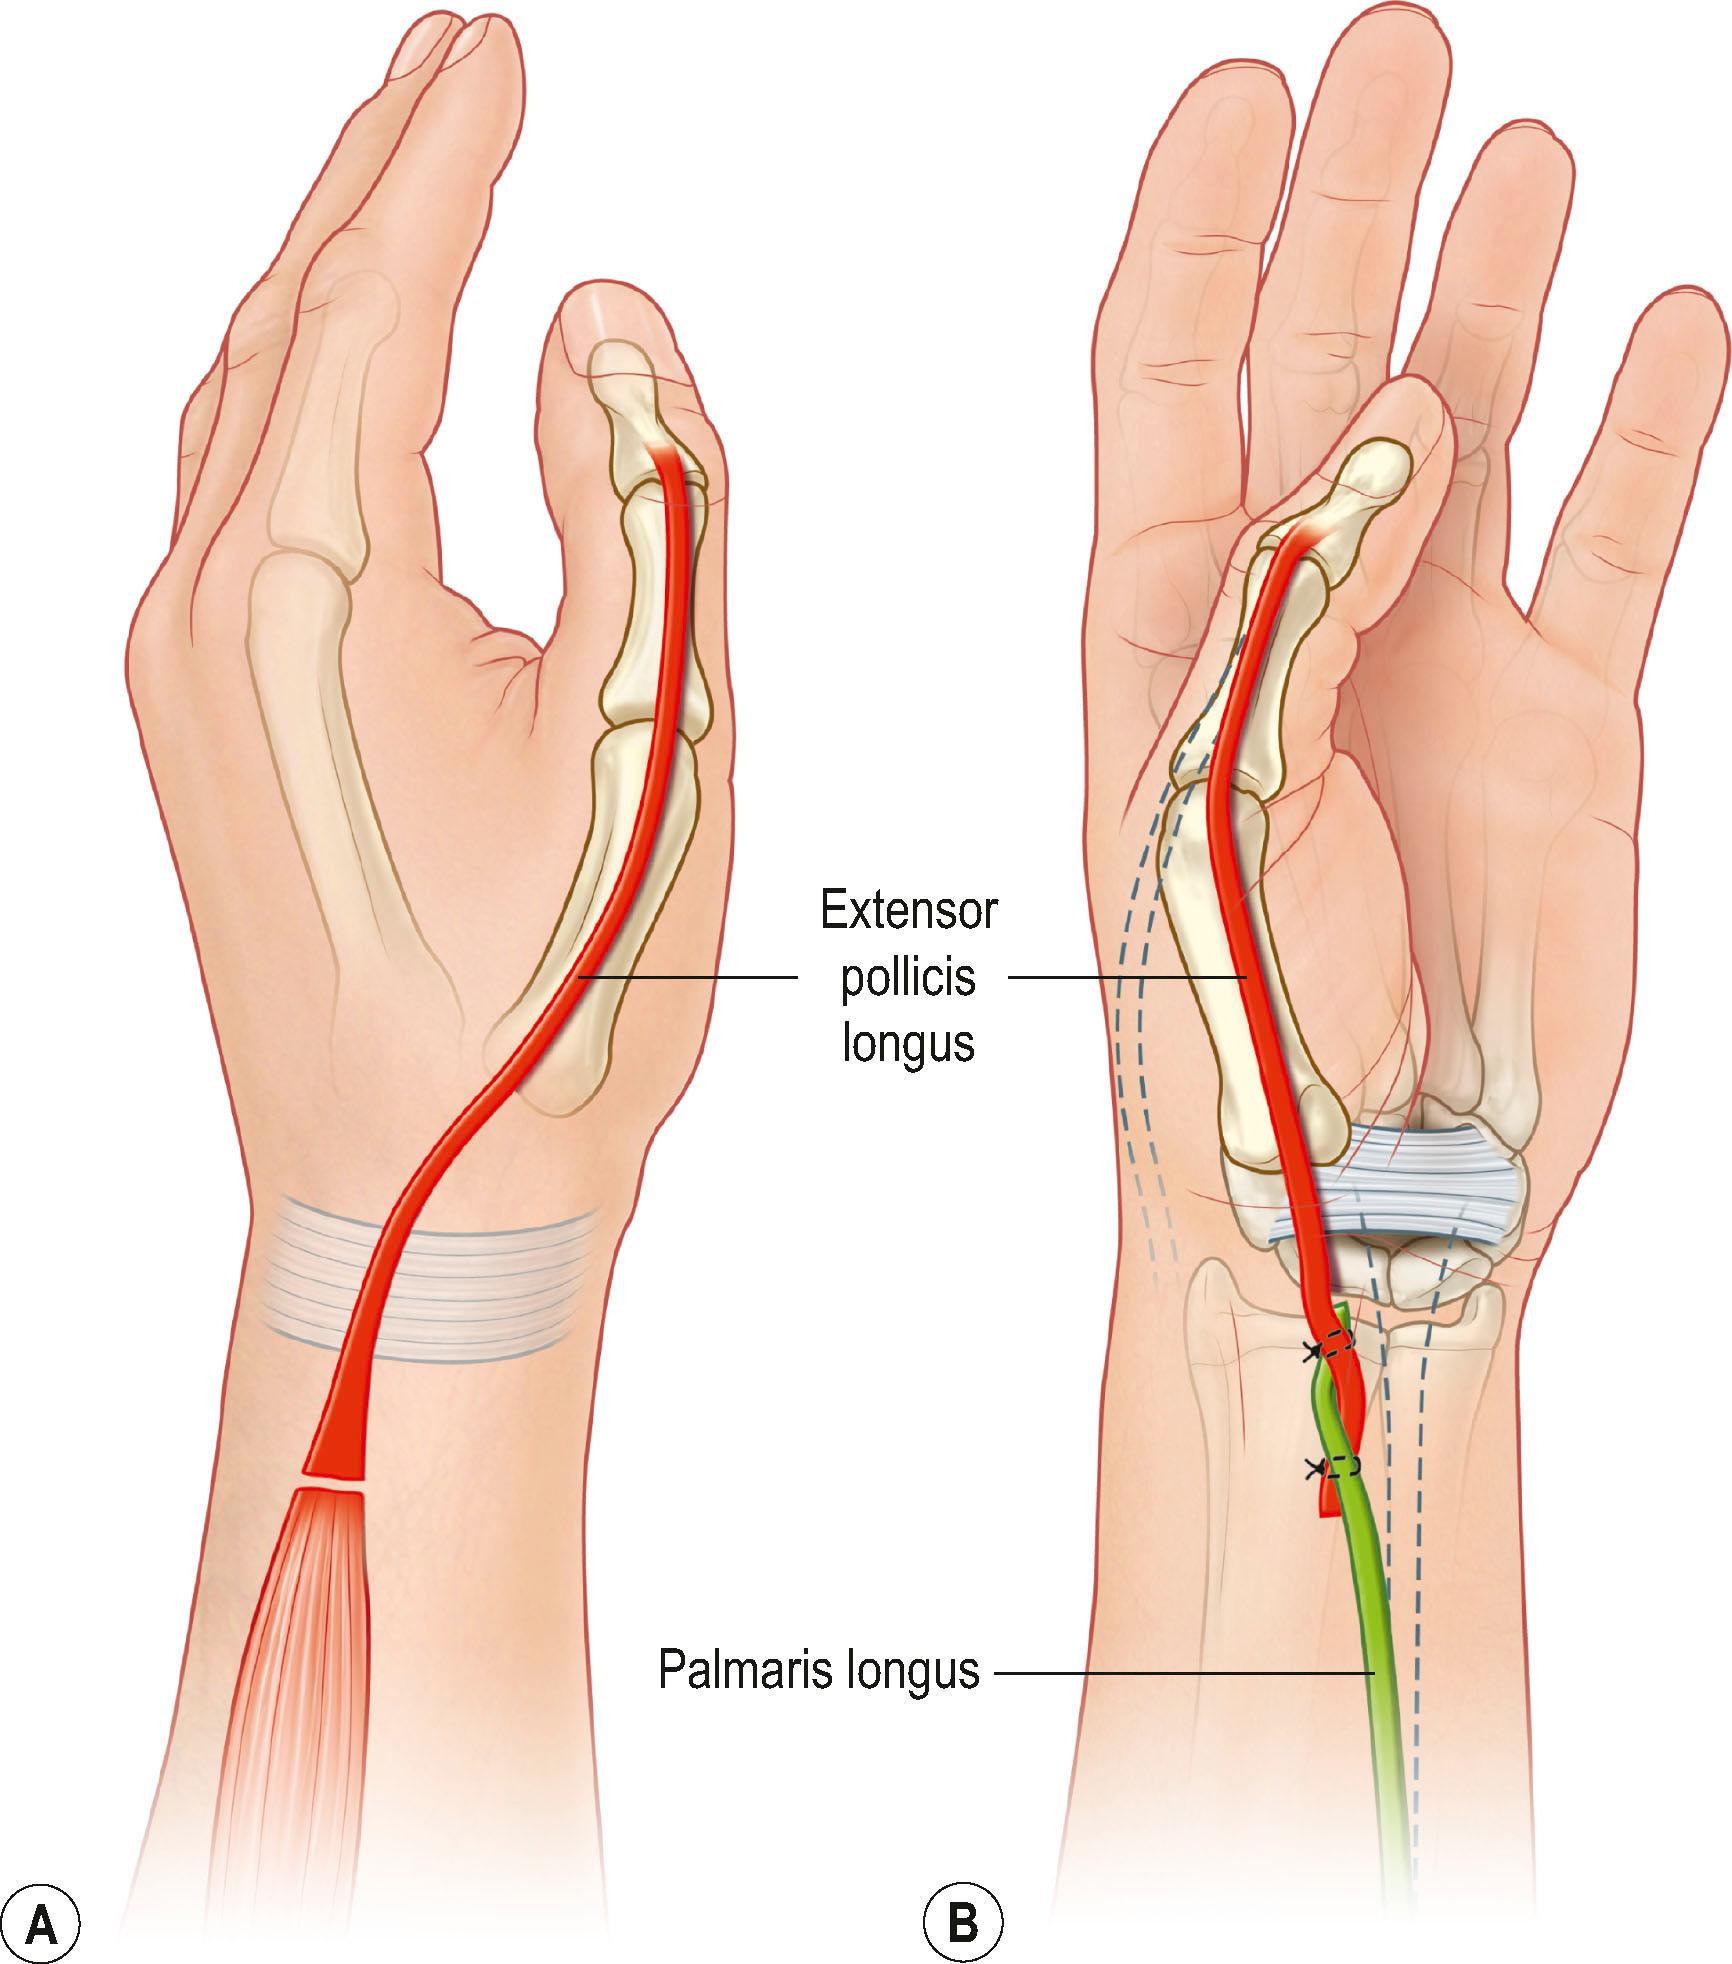 Figure 25.5, (A) The extensor pollicis longus tendon is transected at its musculotendinous junction, (B) re-routed into the anterior incision in the distal forearm and attached to the palmaris longus, if present, to provide both thumb extension and some radial abduction.